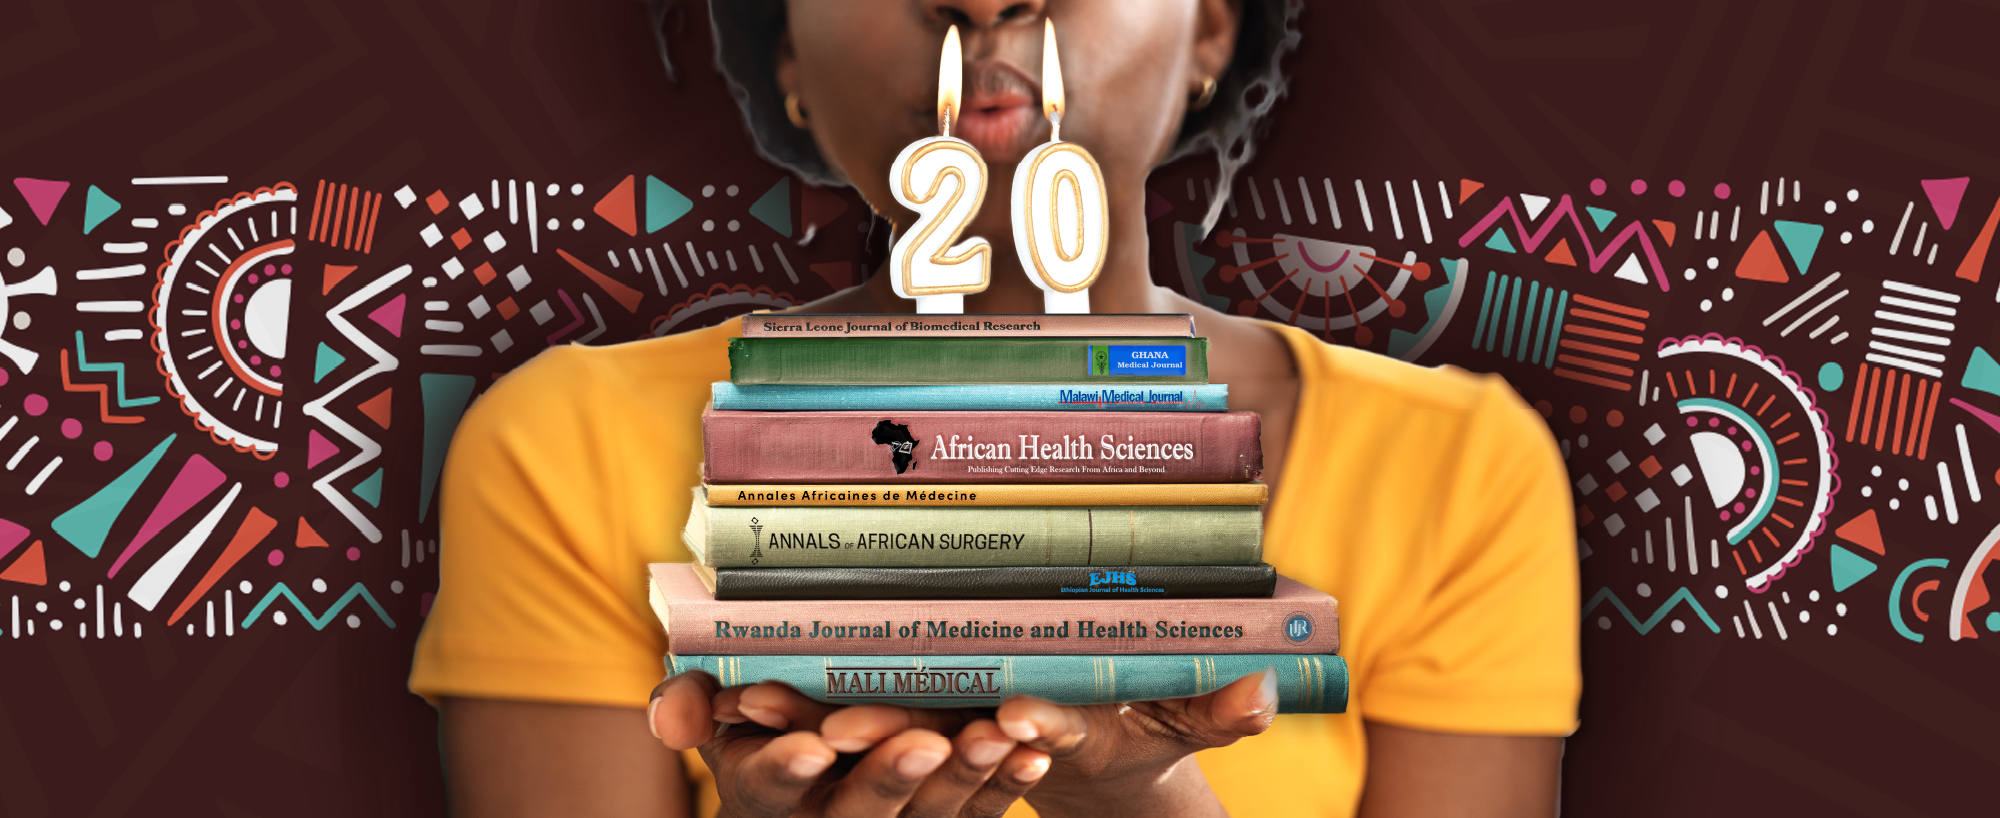 At 20, the African Journal Partnership Program Enters Young Adulthood